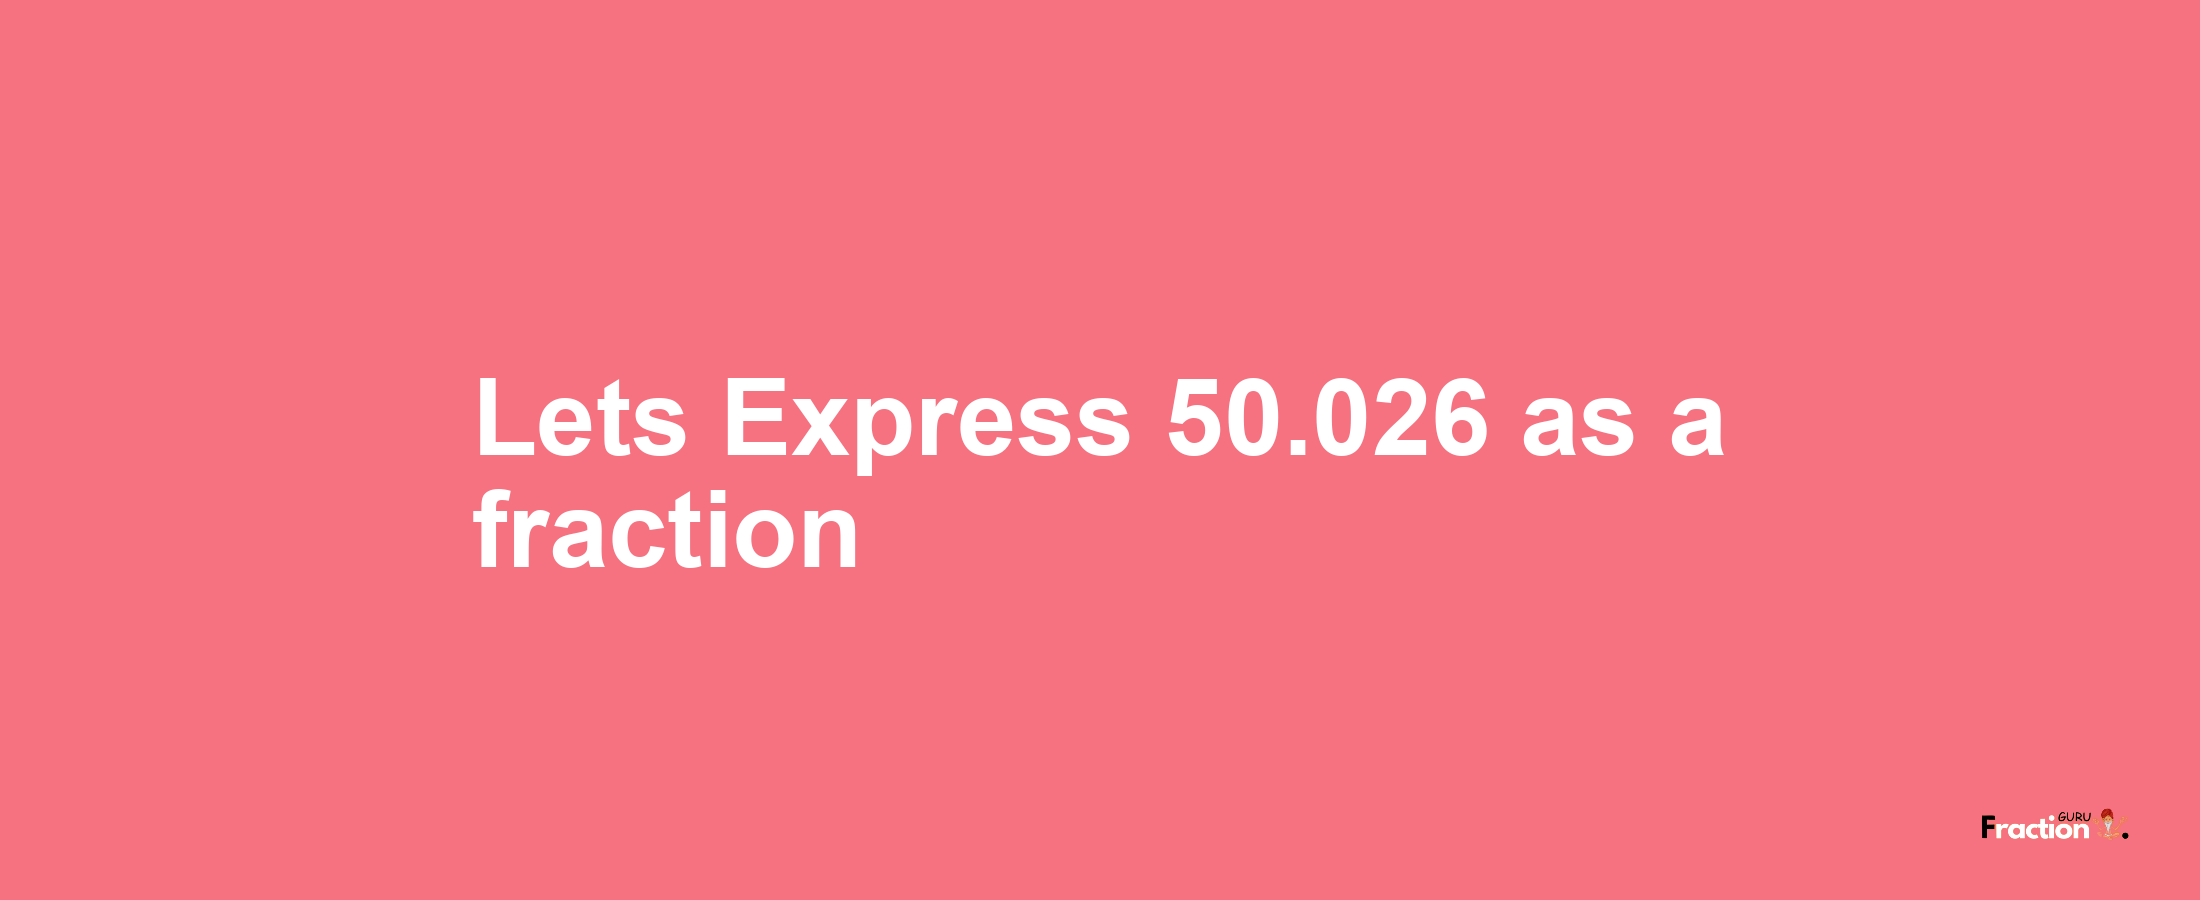 Lets Express 50.026 as afraction